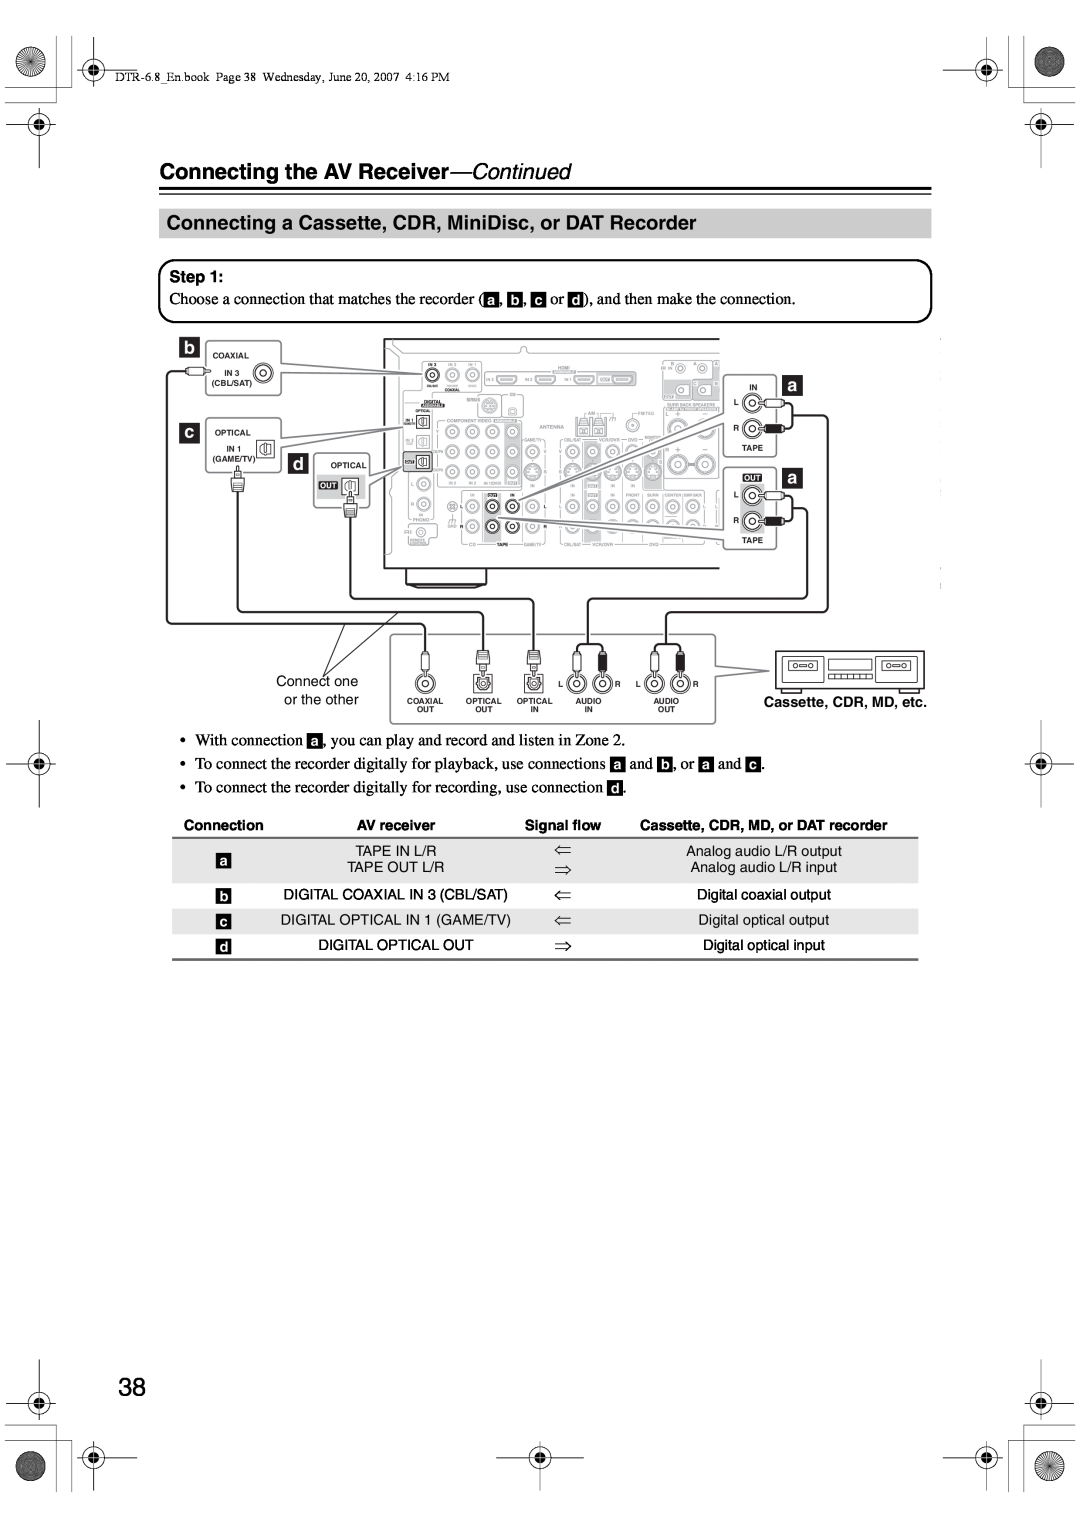 Integra DTR-6.8 instruction manual Connecting the AV Receiver—Continued 